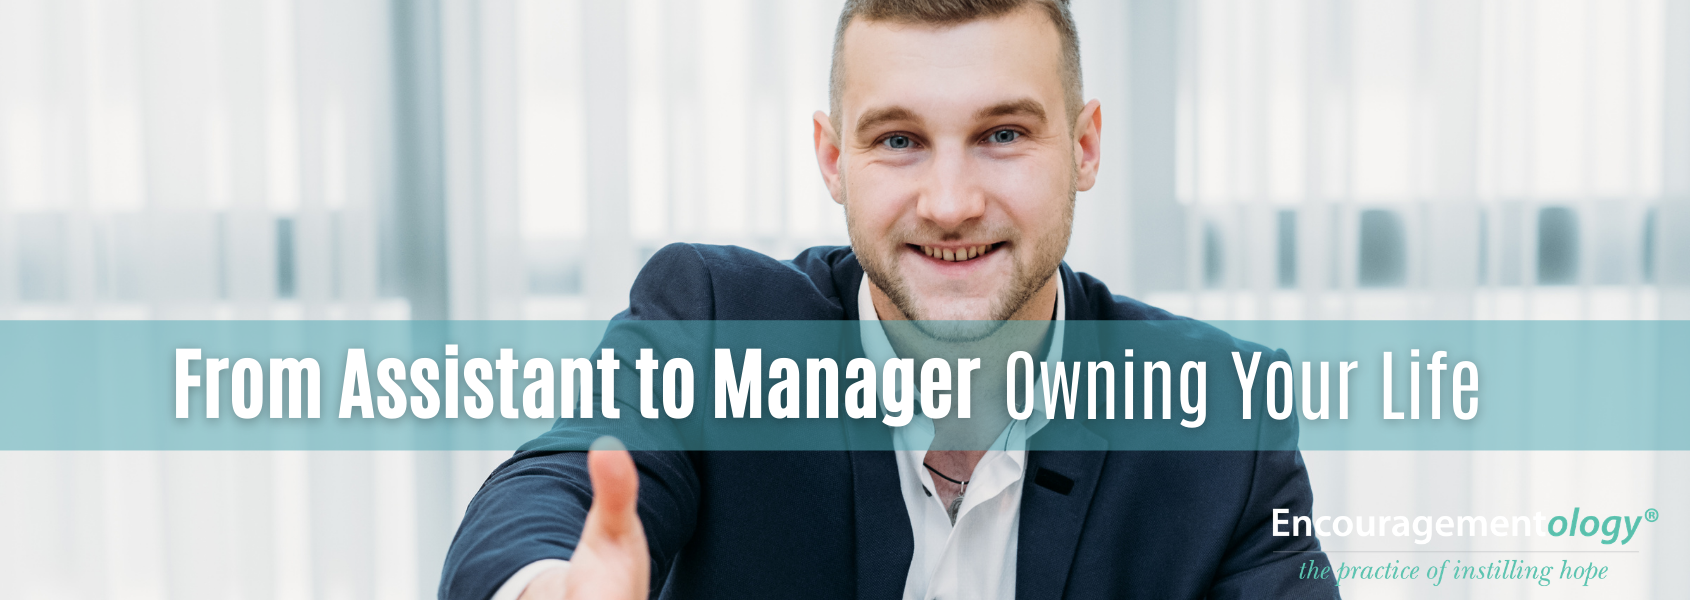 From Assistant to Manager, Owning Your Life